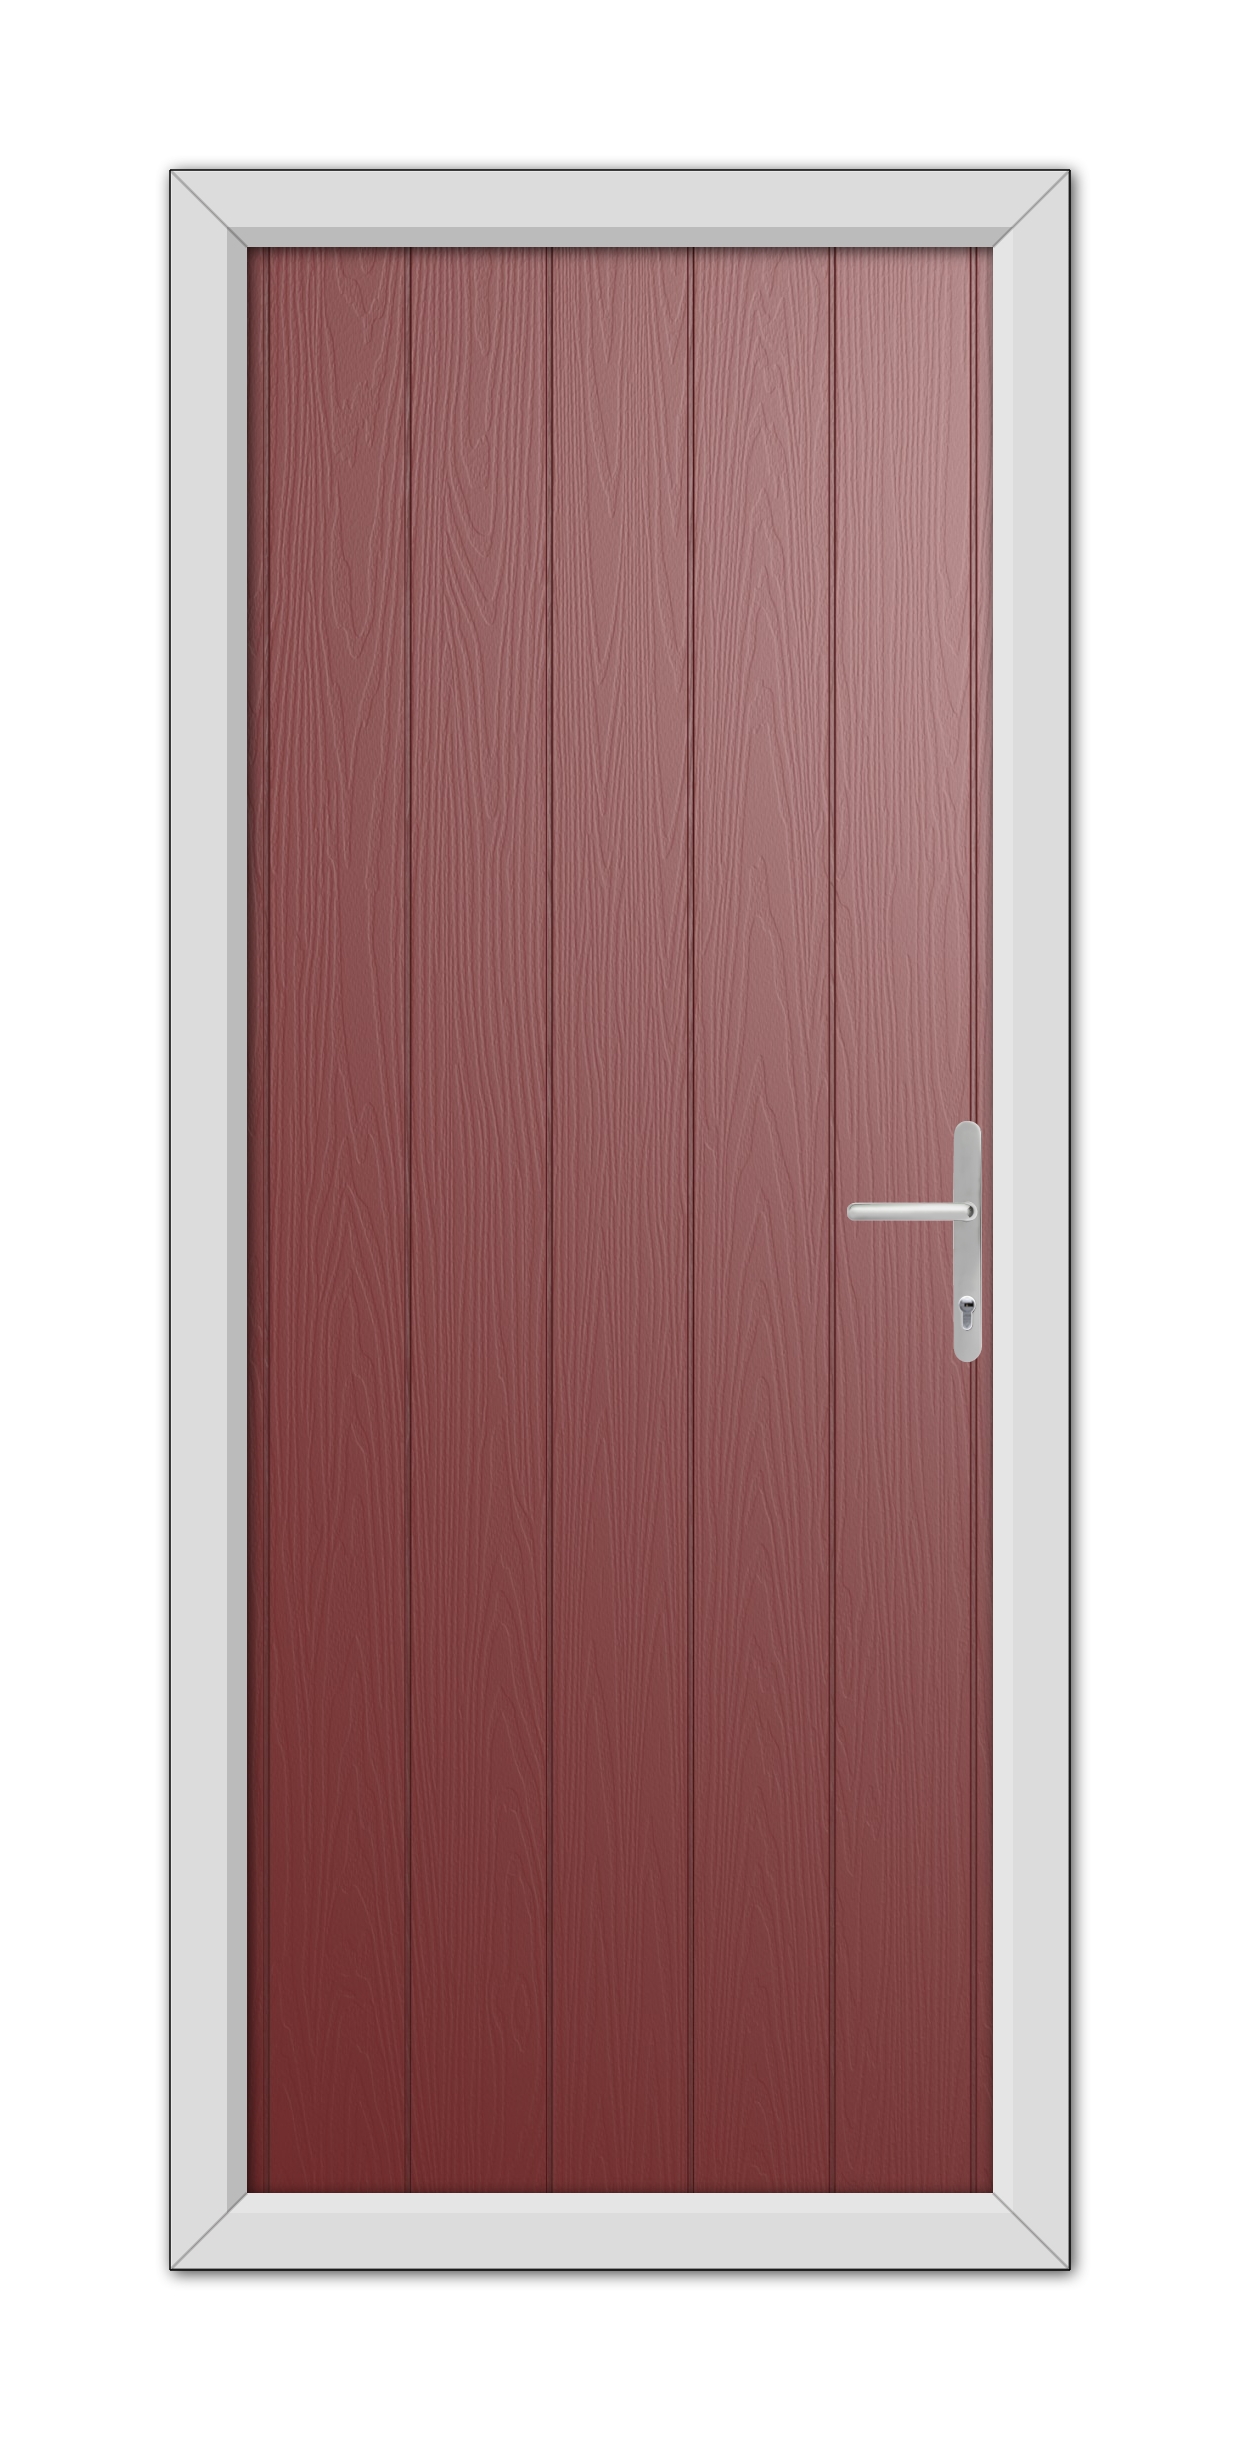 A red Gloucester Composite Door 48mm Timber Core with vertical paneling, featuring a silver handle on the right, set within a white door frame.